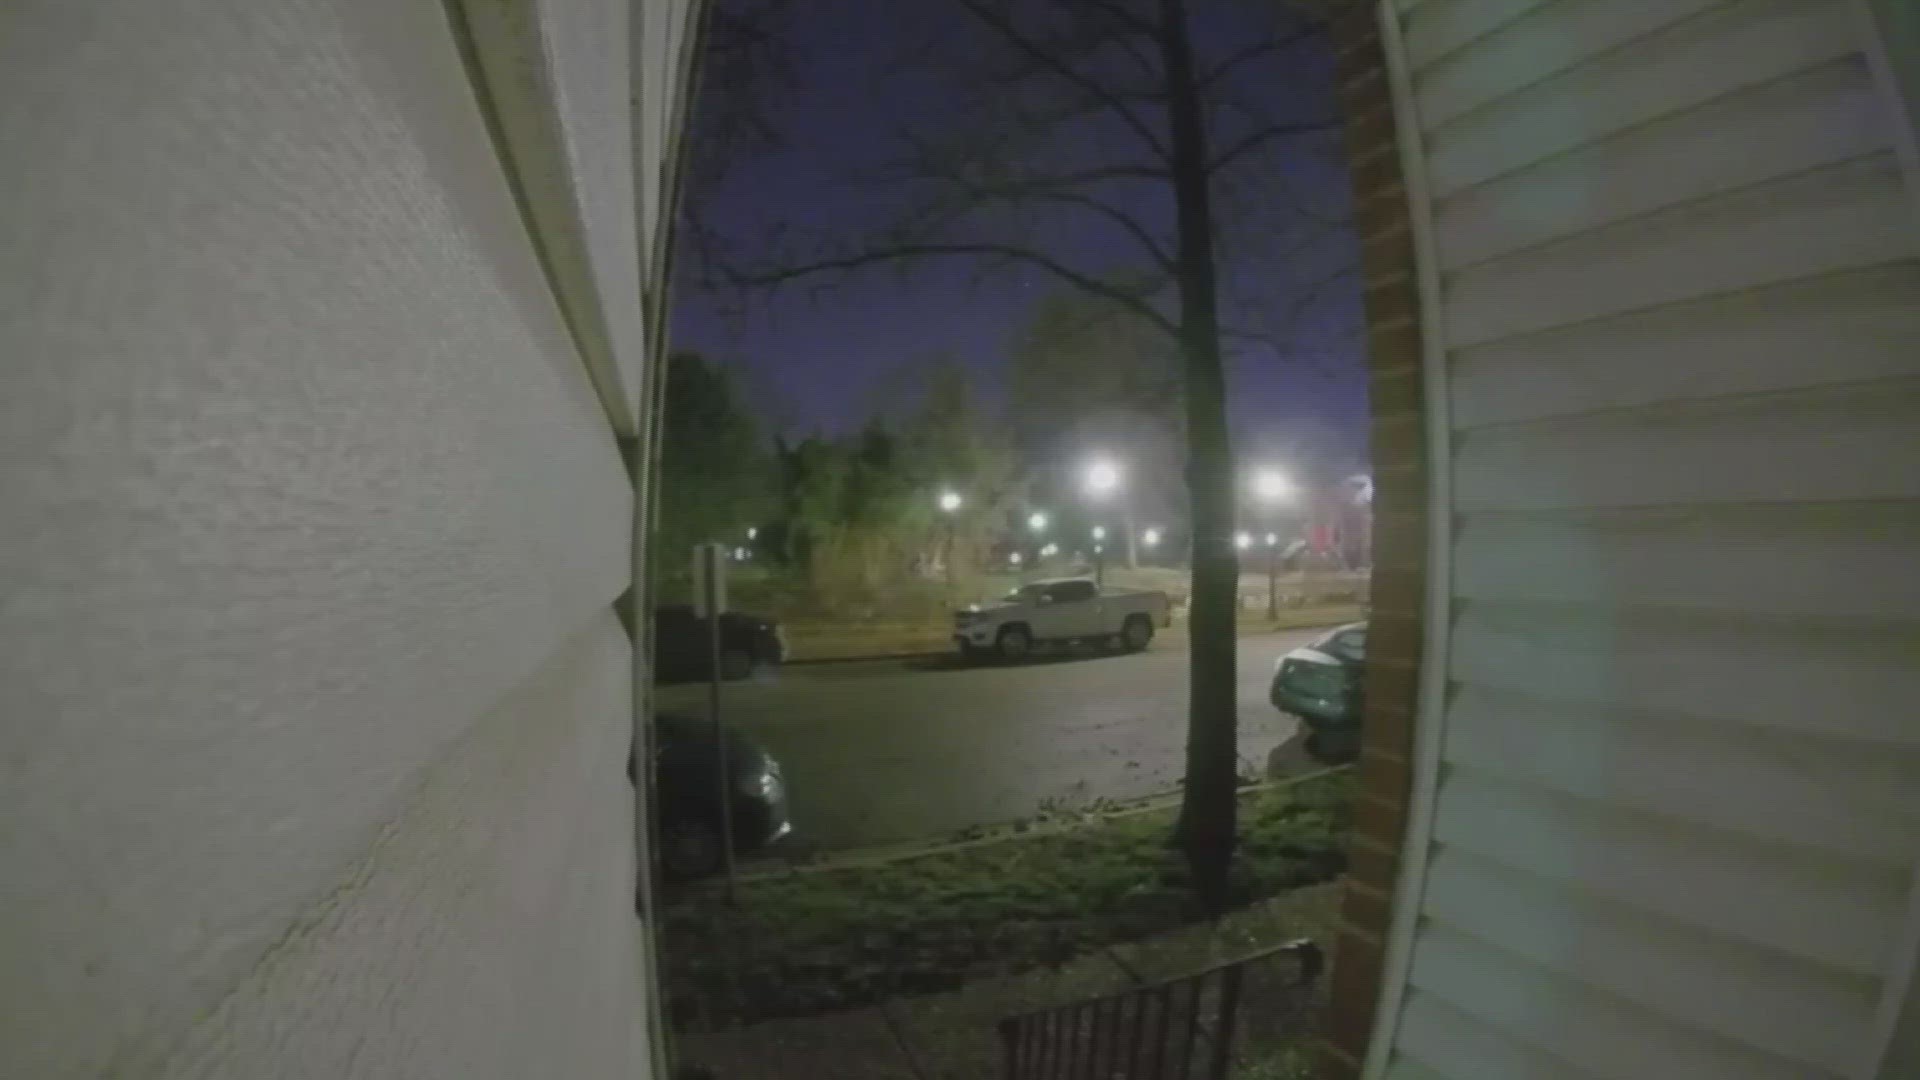 Security cameras captured a Friday night shootout that damaged 10 vehicles in Soulard. "It was a good 30 to 40 shots I heard," neighbor Devon Colmoney said.